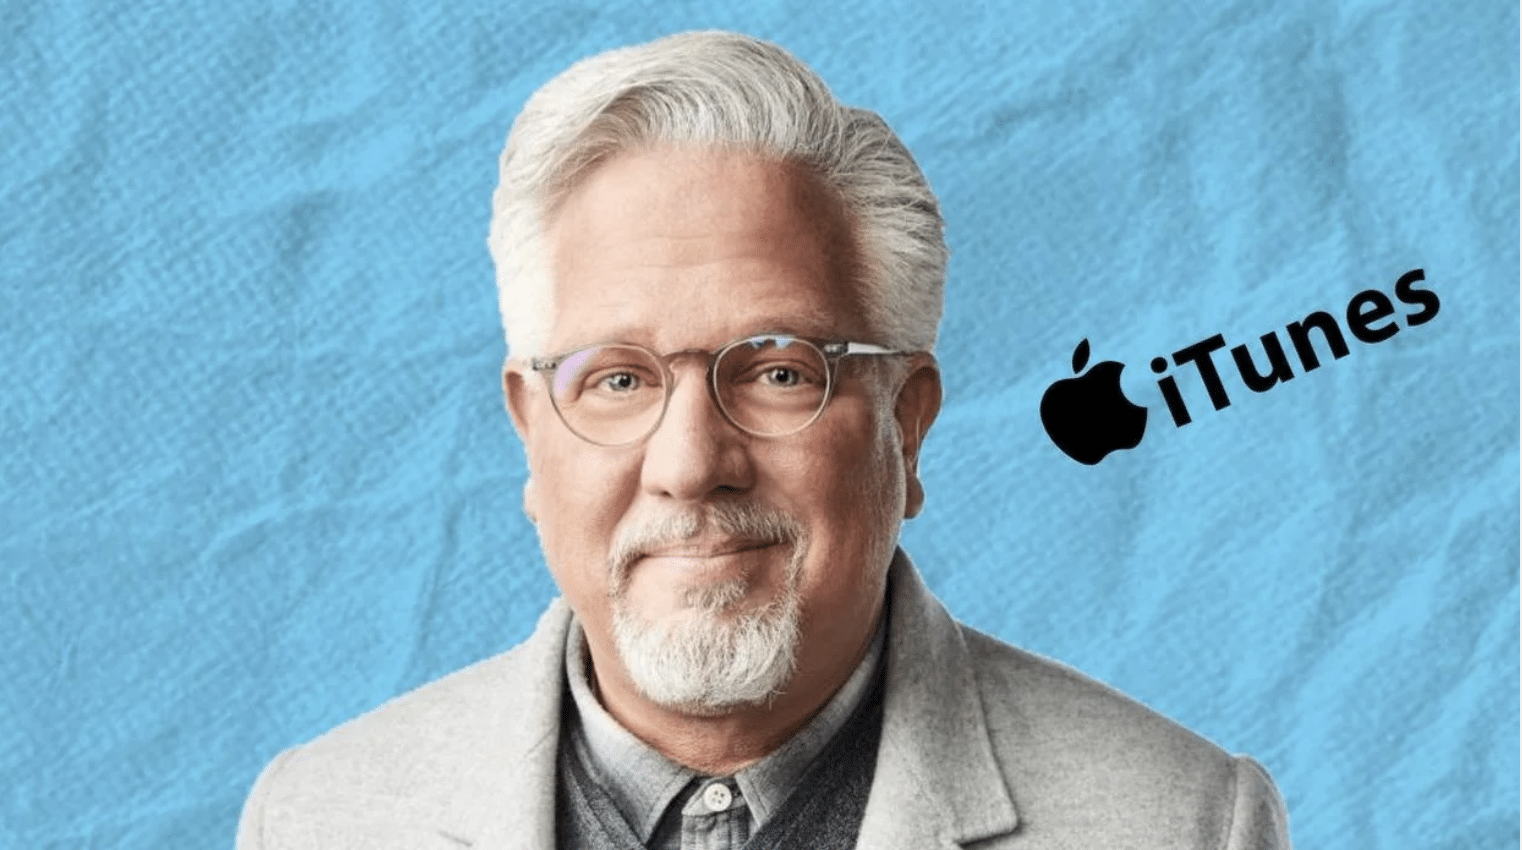 The Glenn Beck Program has been booted from Apple Podcast, No explanation given